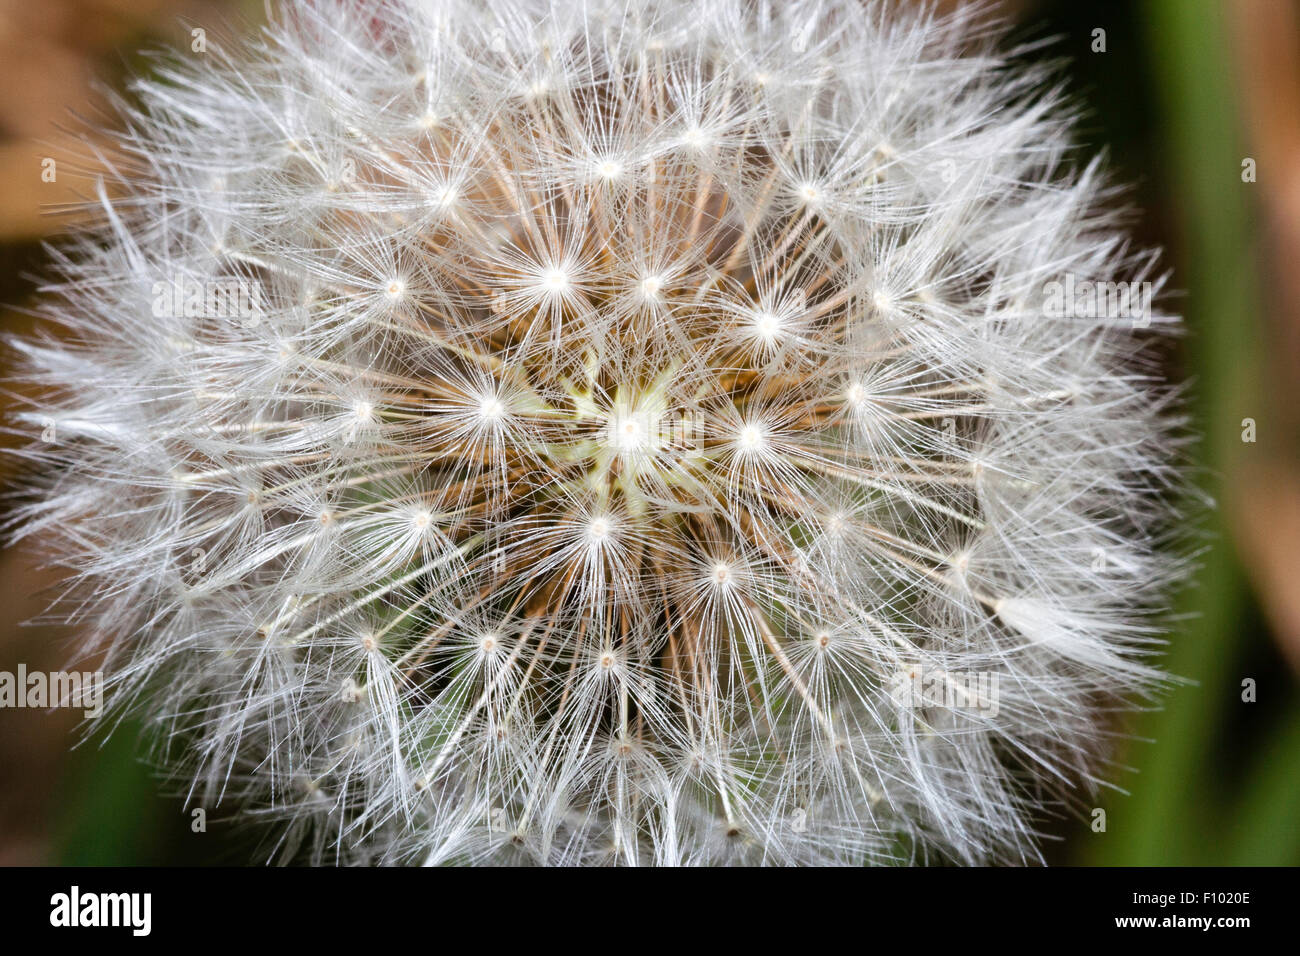 Dandelion 'Taraxacum agg', flower head turned into seed-head with round pattern of white seeds, in spray from flower head. Macro close up. Stock Photo